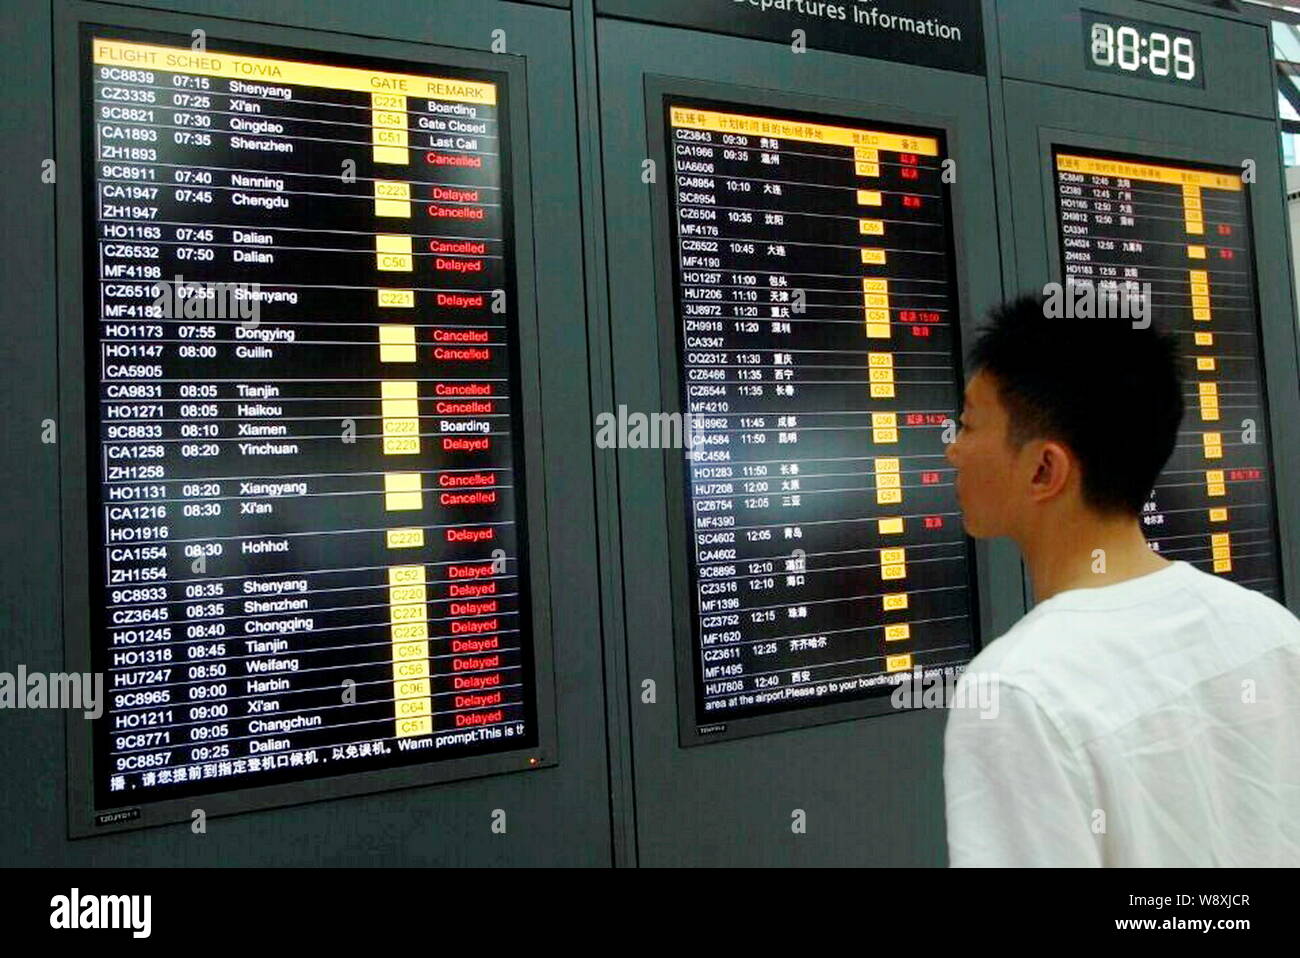 A passenger watches displays showing departure information of flights, most of which were cancelled or delayed due to Typhoon Fung-Wong, at the Termin Stock Photo